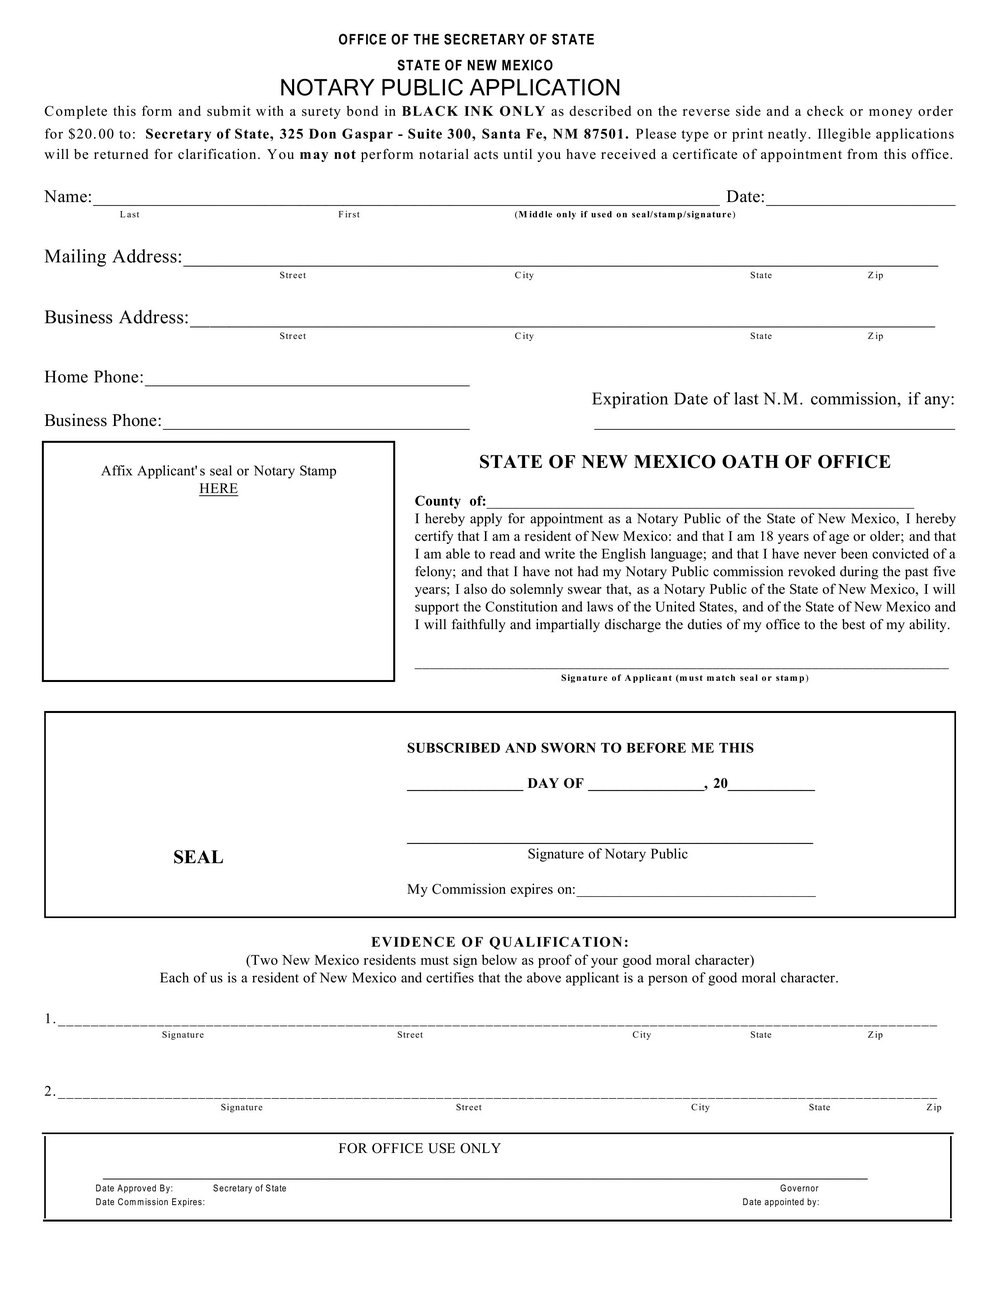 cna license renewal form in texas